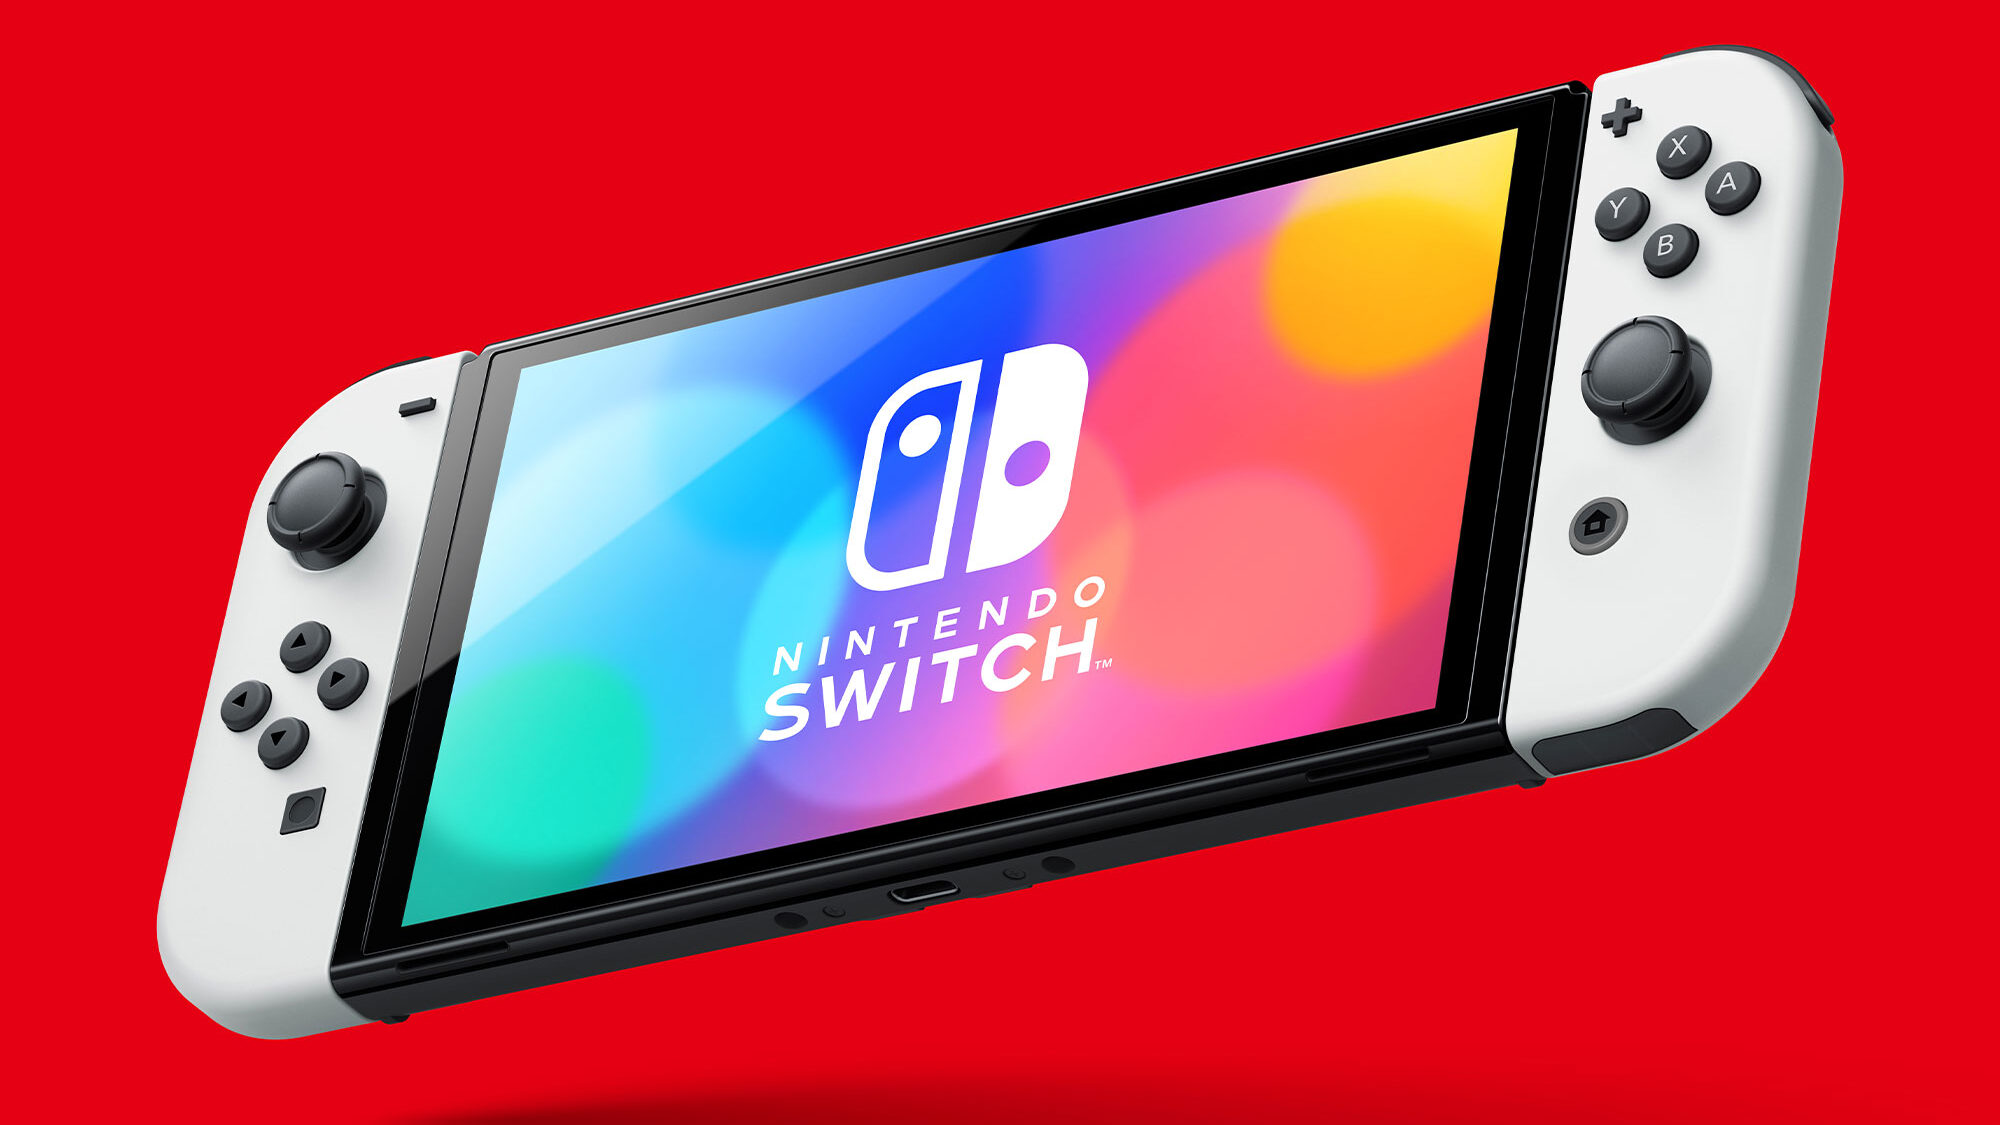 Will the Nintendo Switch ever see a price drop?